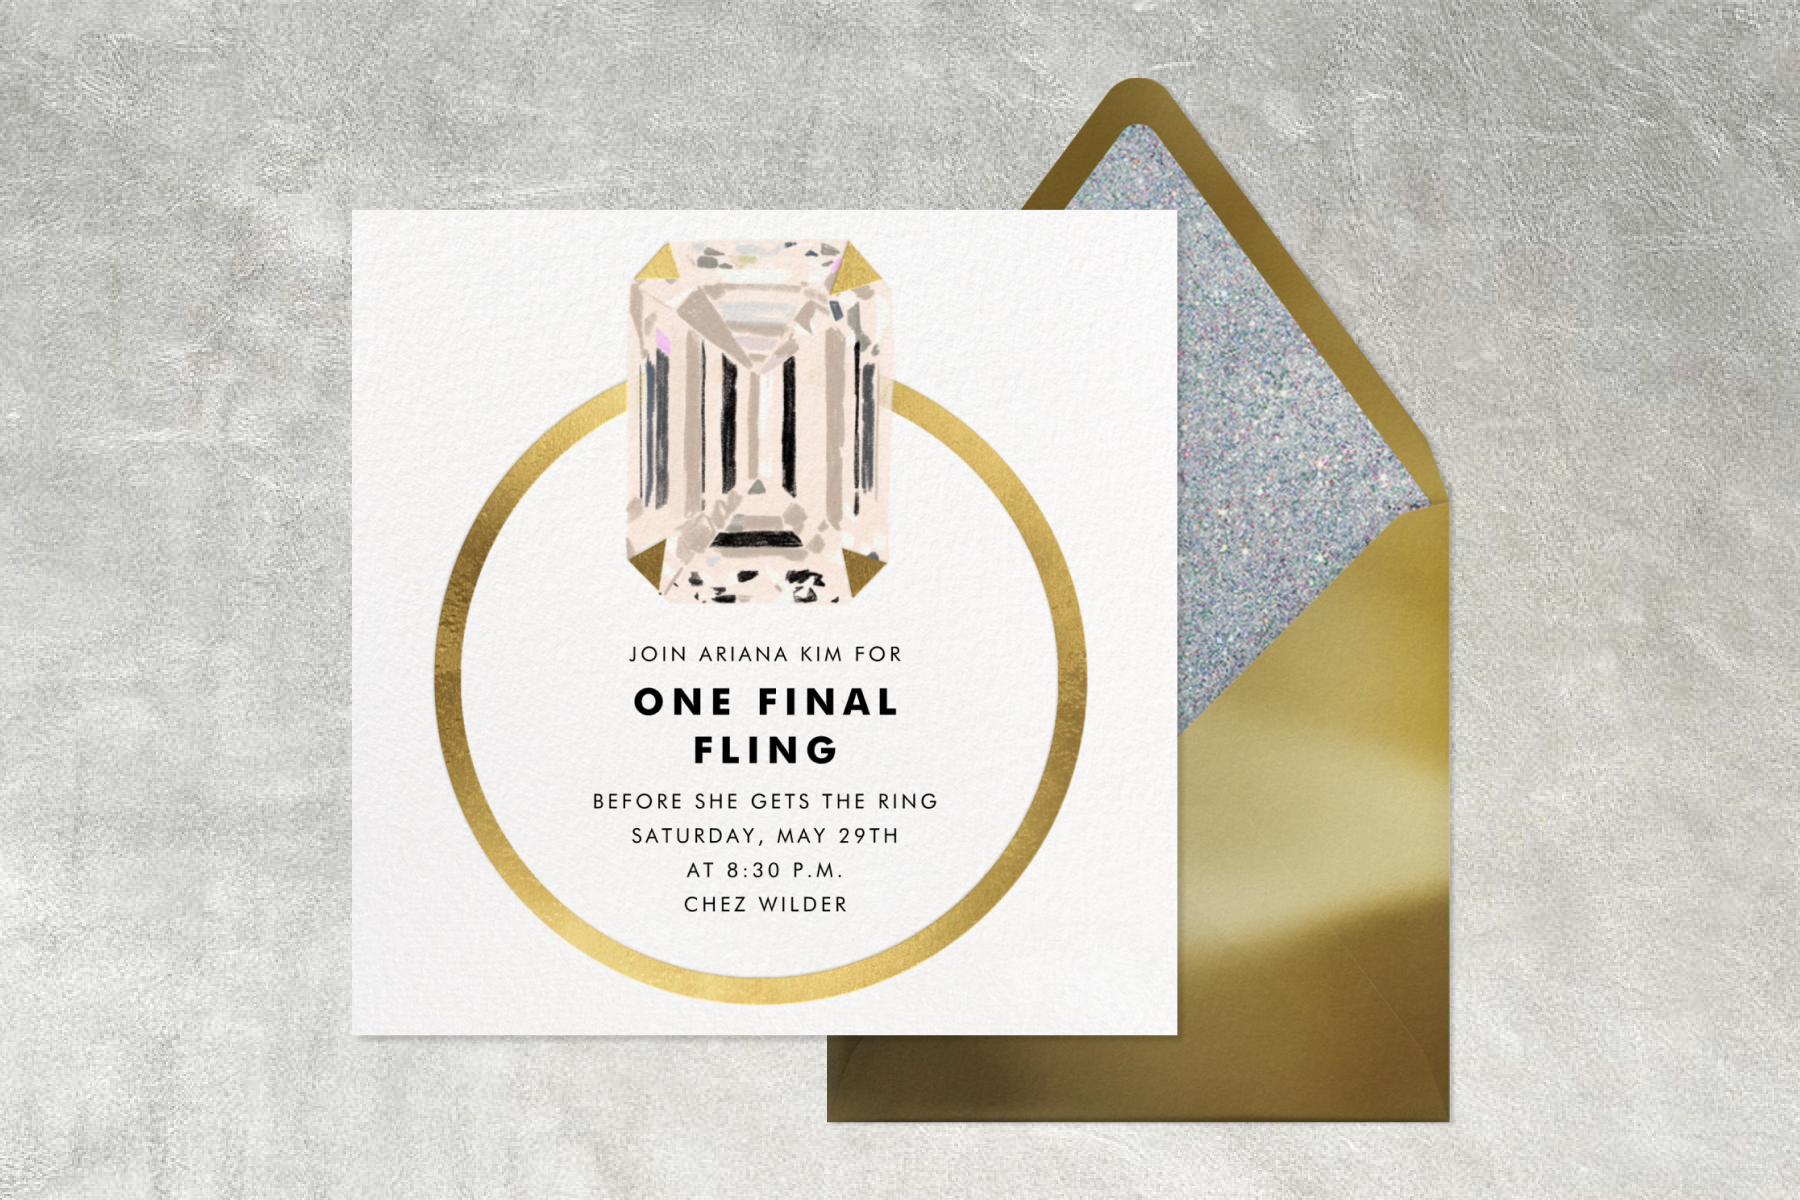 A square invitation for ONE FINAL FLING with a large emerald cut diamond ring, beside a gold and silver envelope.